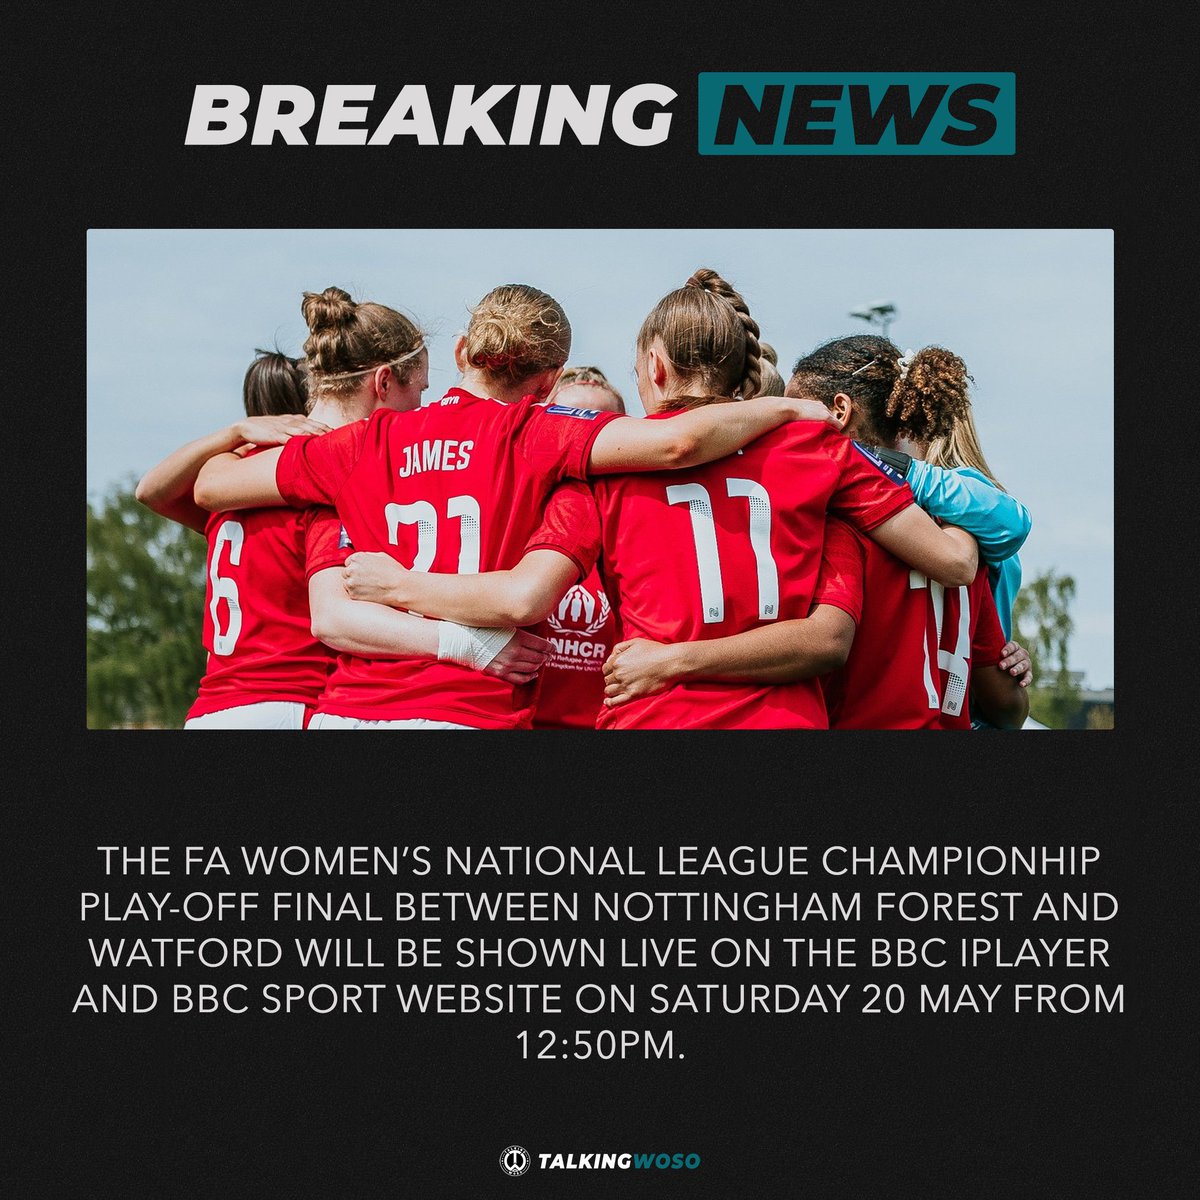 𝗟𝗜𝗩𝗘 | FA WNL PLAY-OFF FINAL The @FAWNL Championship play-off final between @NFFCWomen and @WatfordFCWomen will be shown live on the BBC iPlayer and BBC Sport website on Saturday 20 May from 12:50, with kick-off at 13:00. 📸 @NFFCWomen